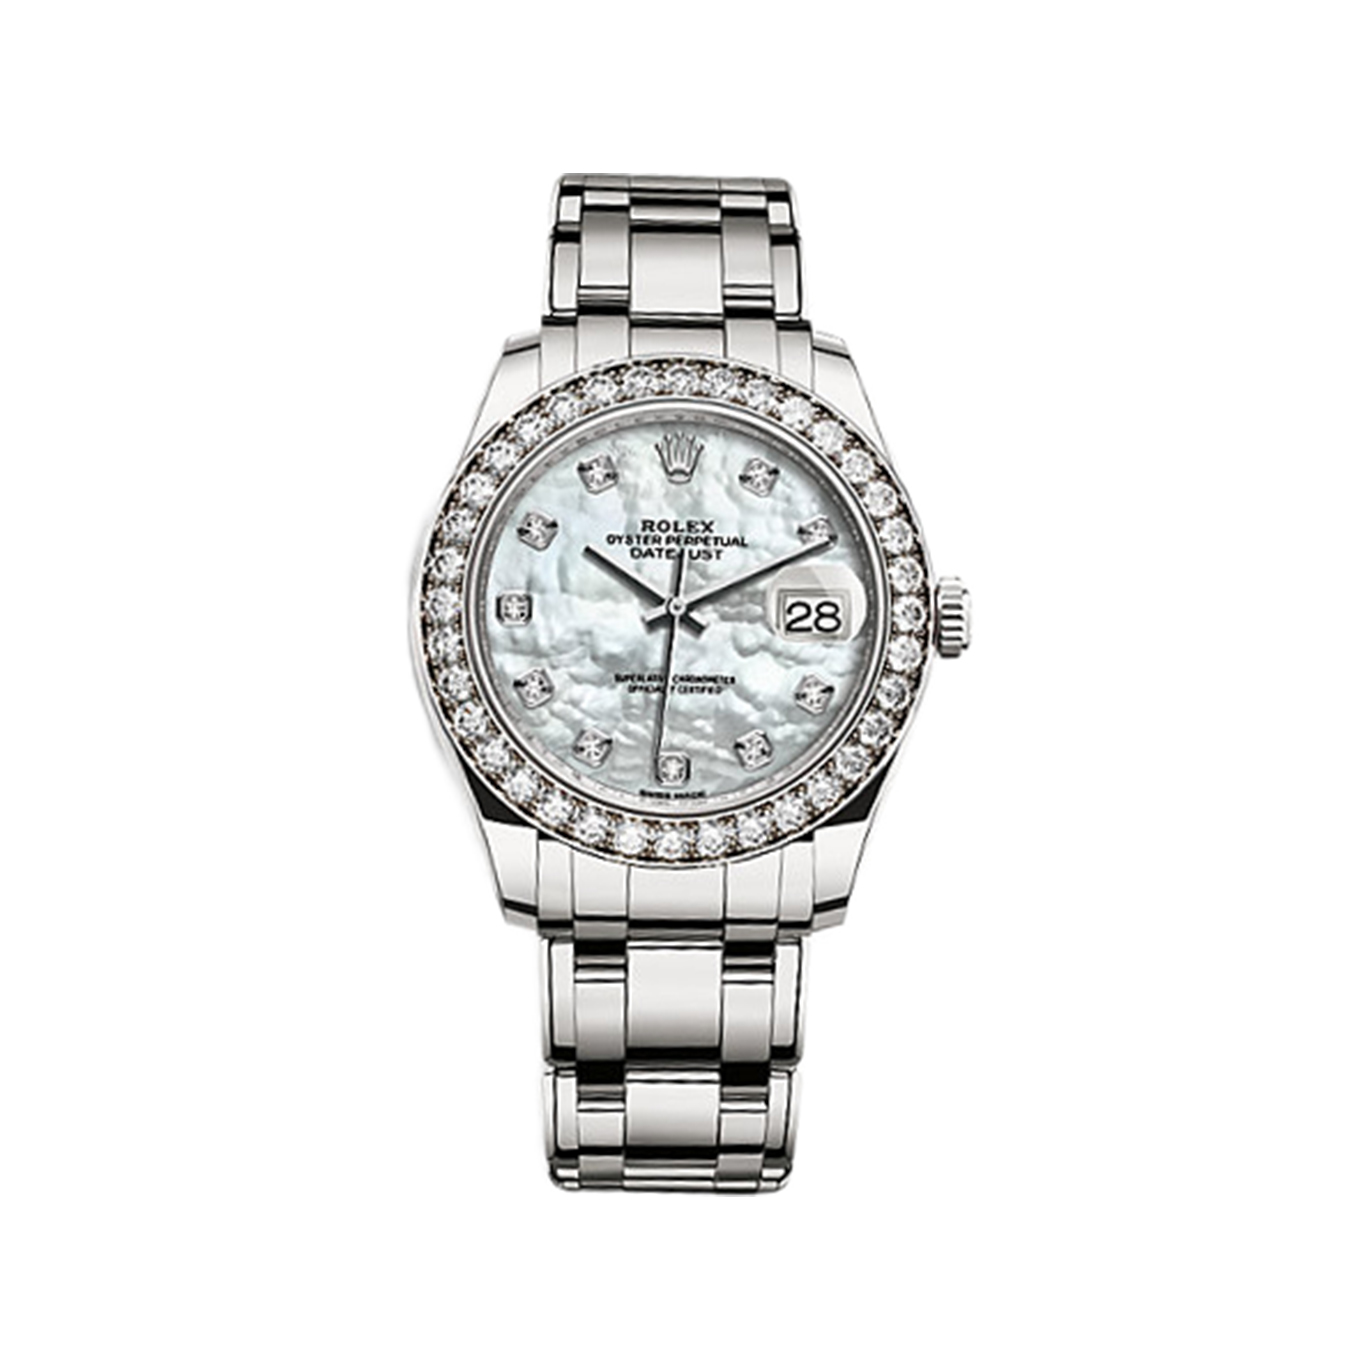 Pearlmaster 39 86289 White Gold & Diamonds Watch (White Mother-of-Pearl Set with Diamonds)